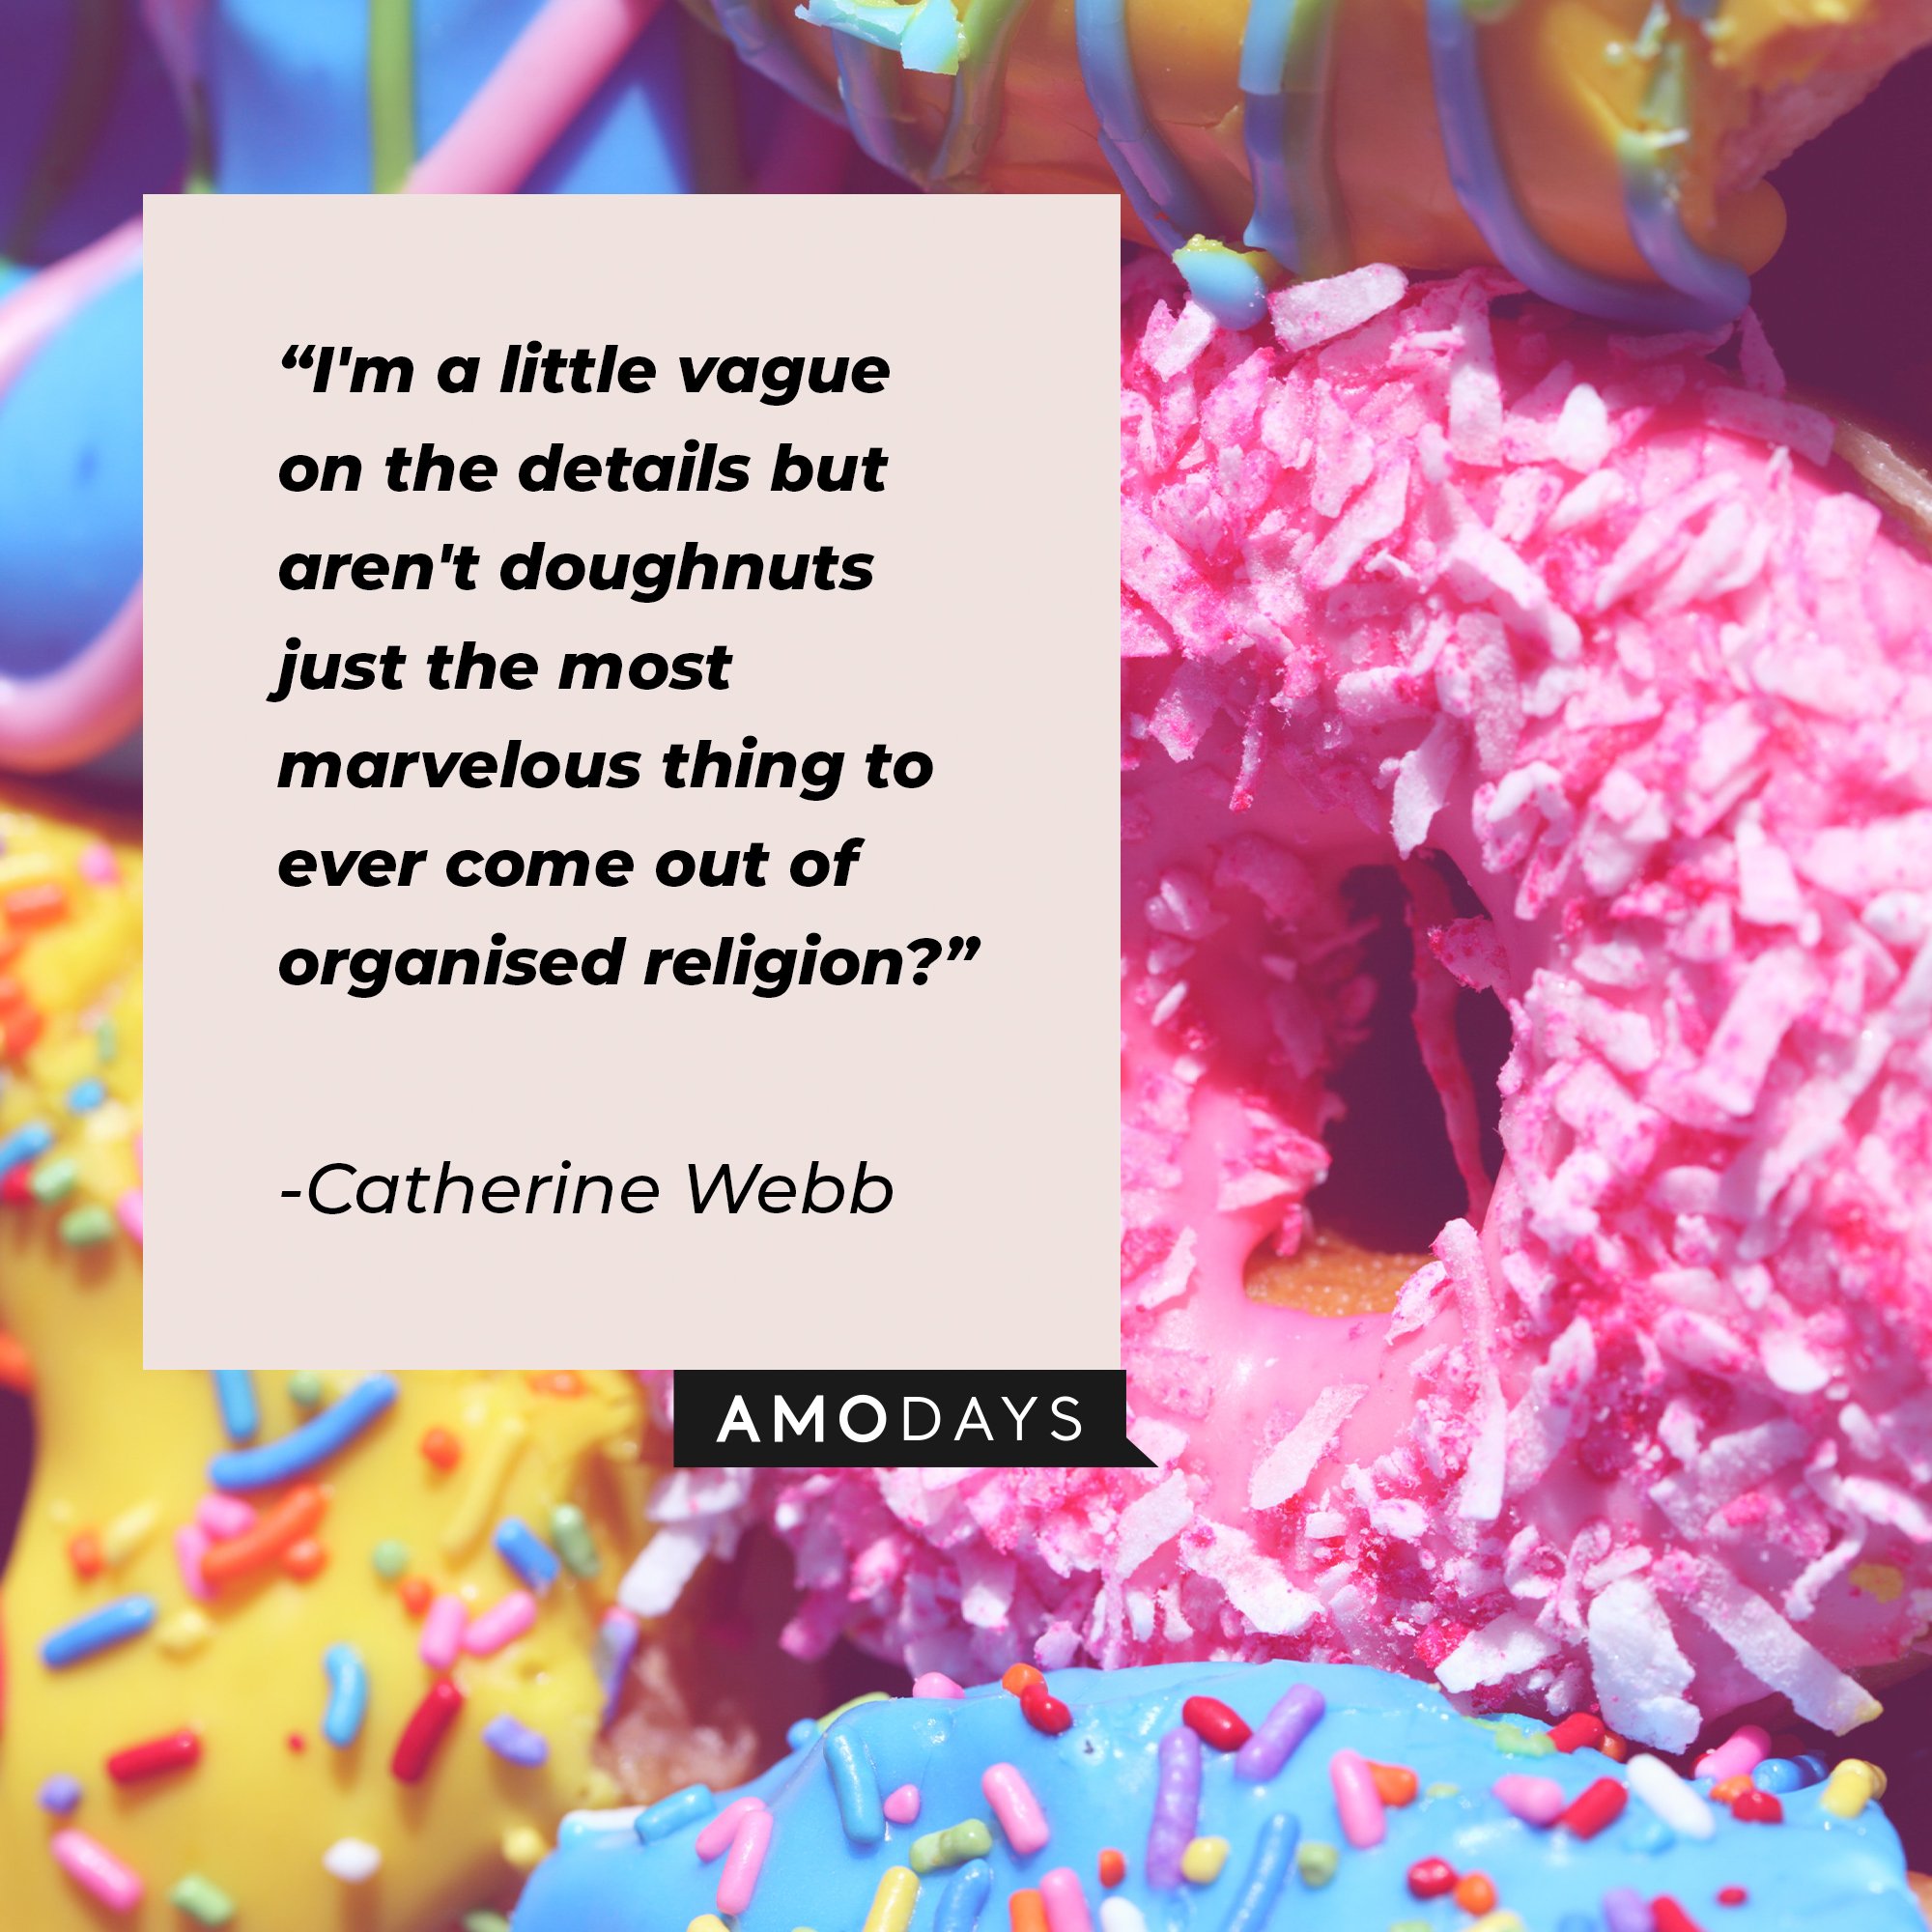  Catherine Webb's quote: "I'm a little vague on the details but aren't doughnuts just the most marvelous thing to ever come out of organised religion?" | Image: AmoDays